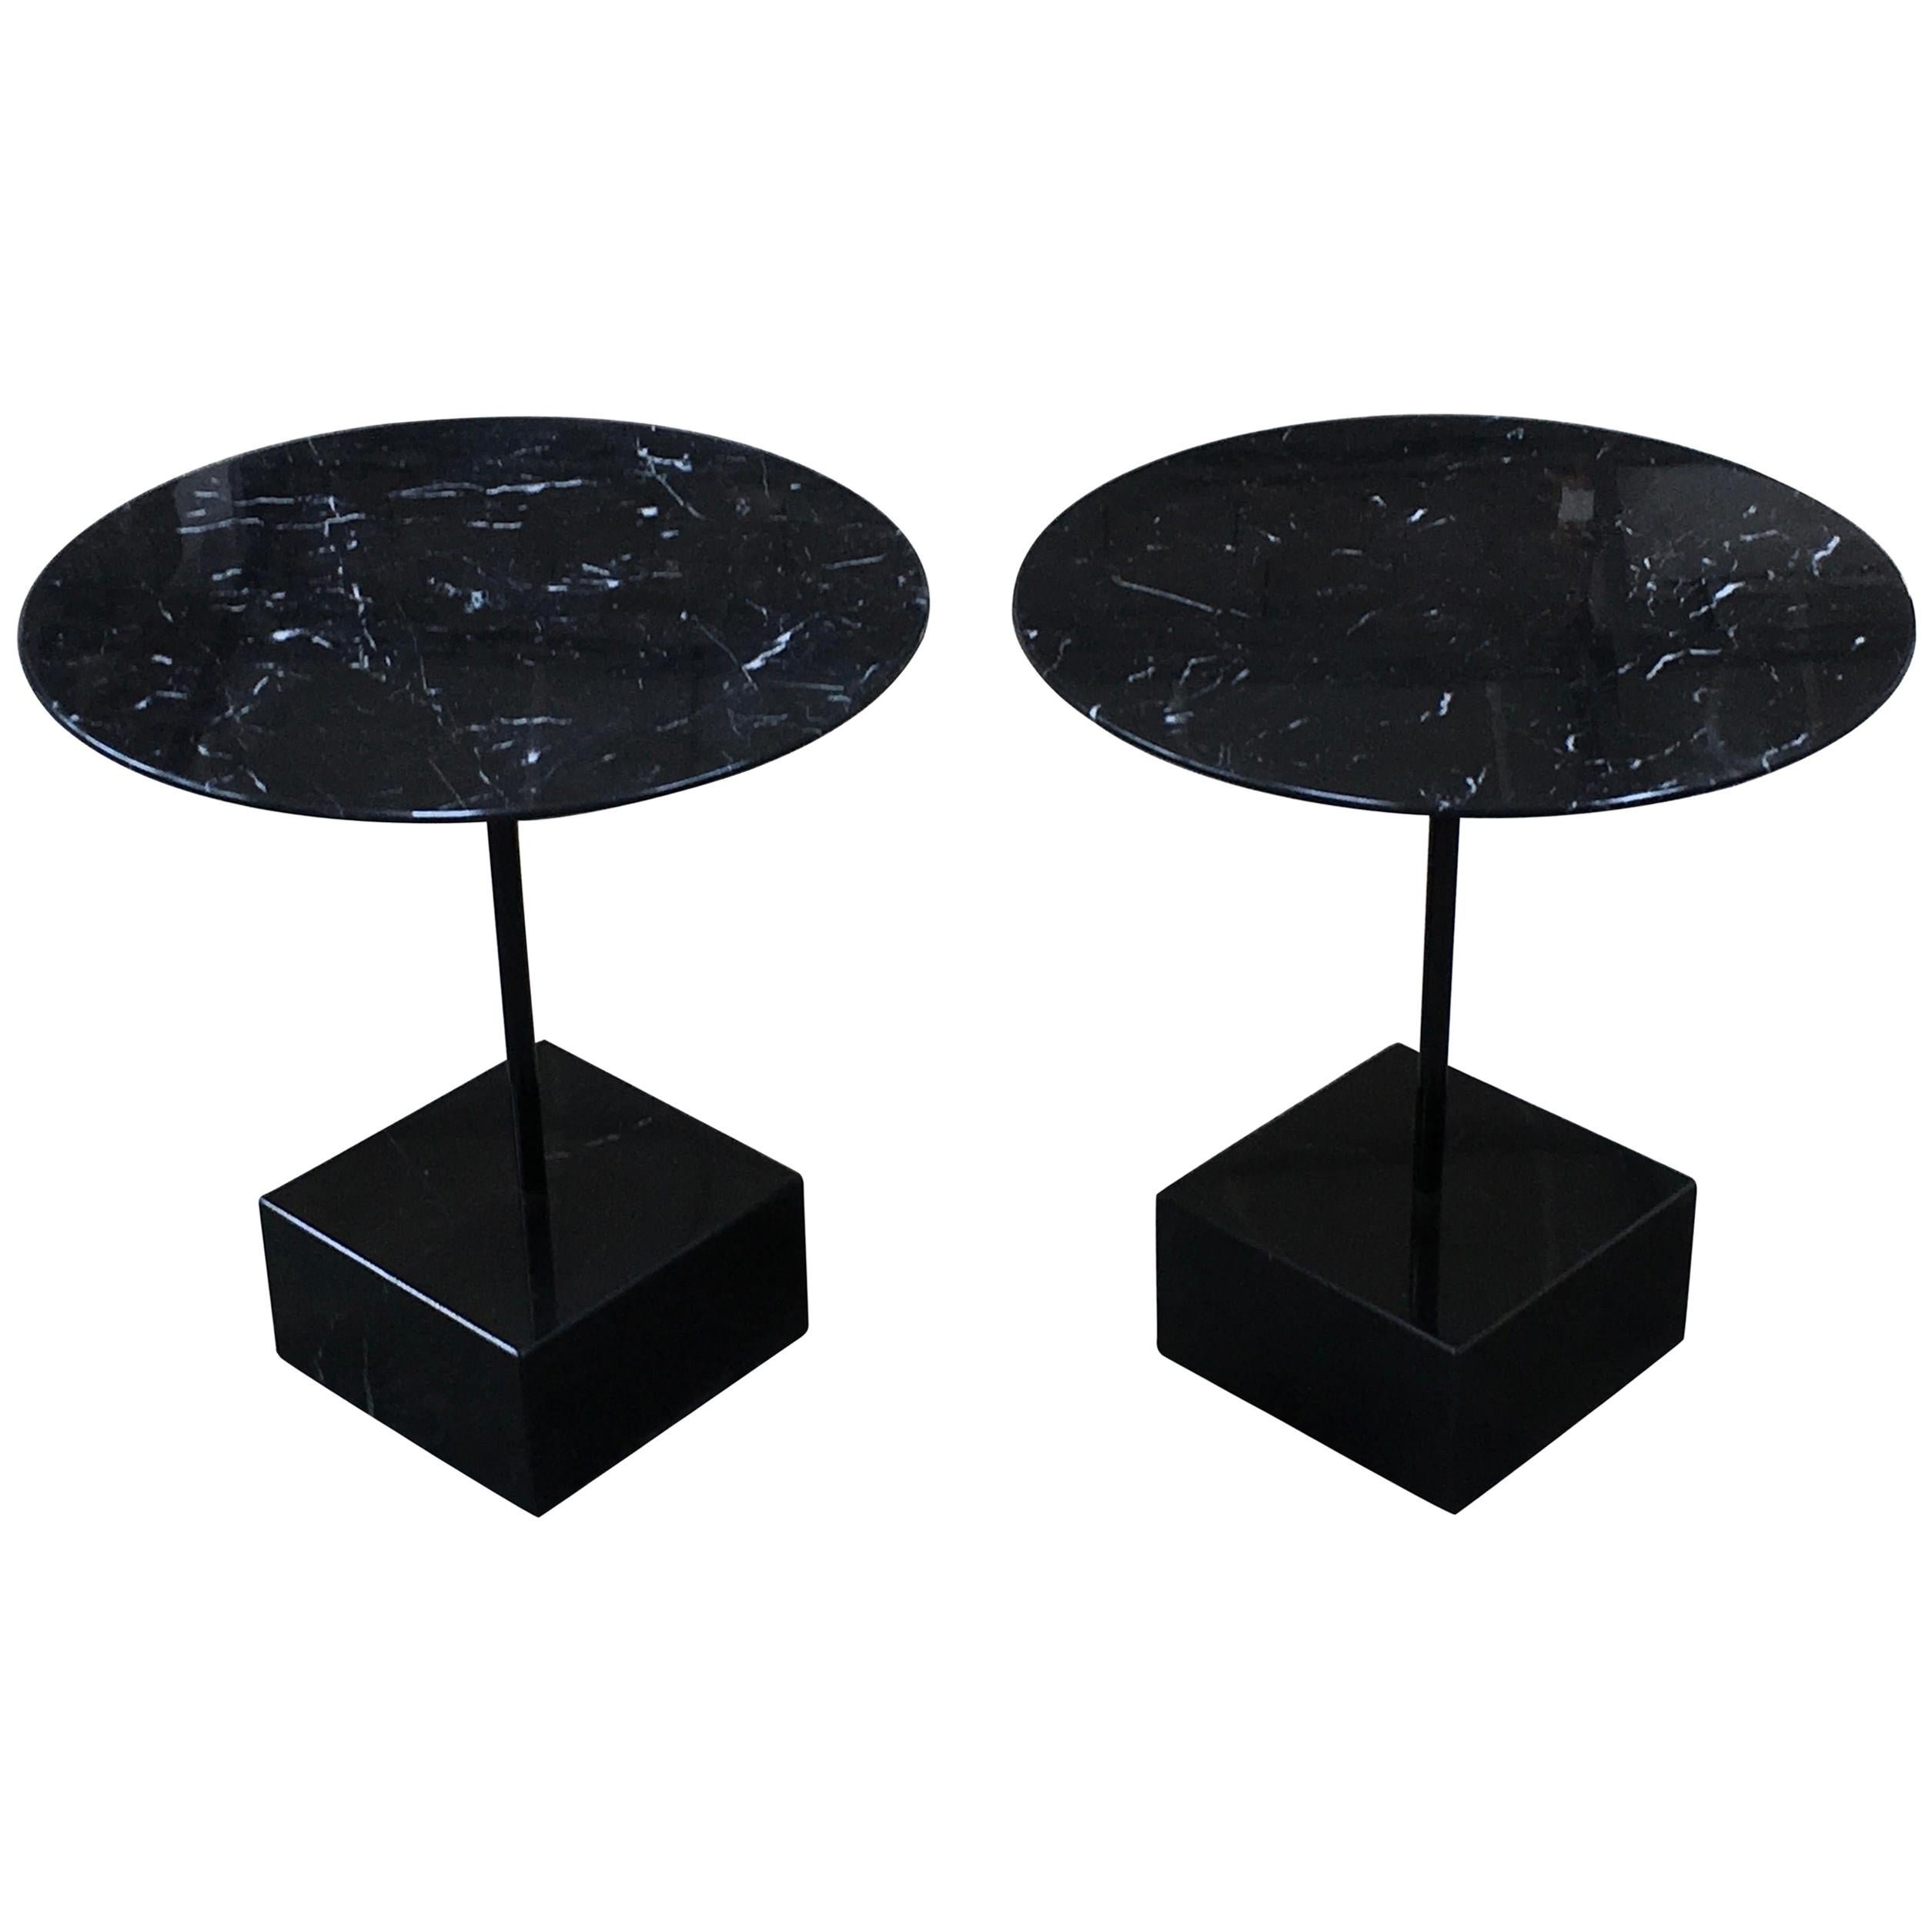 Pair of Primavera Tables by Ettore Sottsass for Ultime Edizioni, Italy